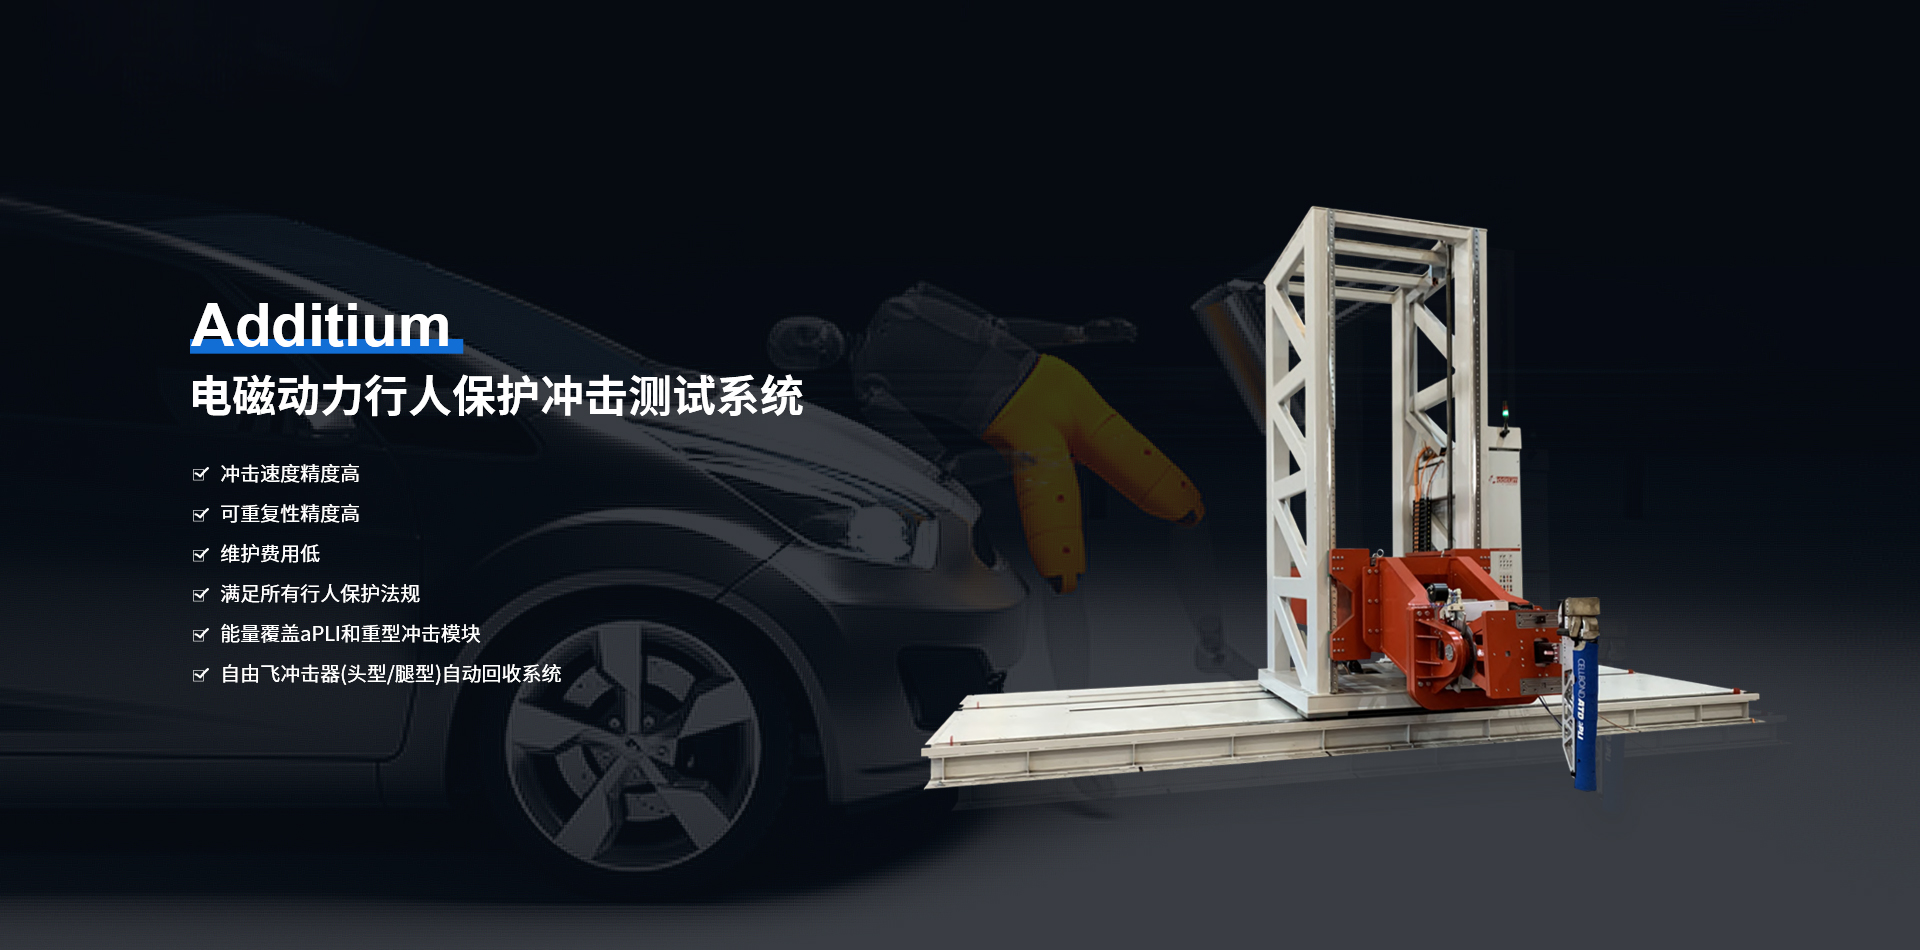 Additium Electromagnetic Power Pedestrian Protection Impact Test System